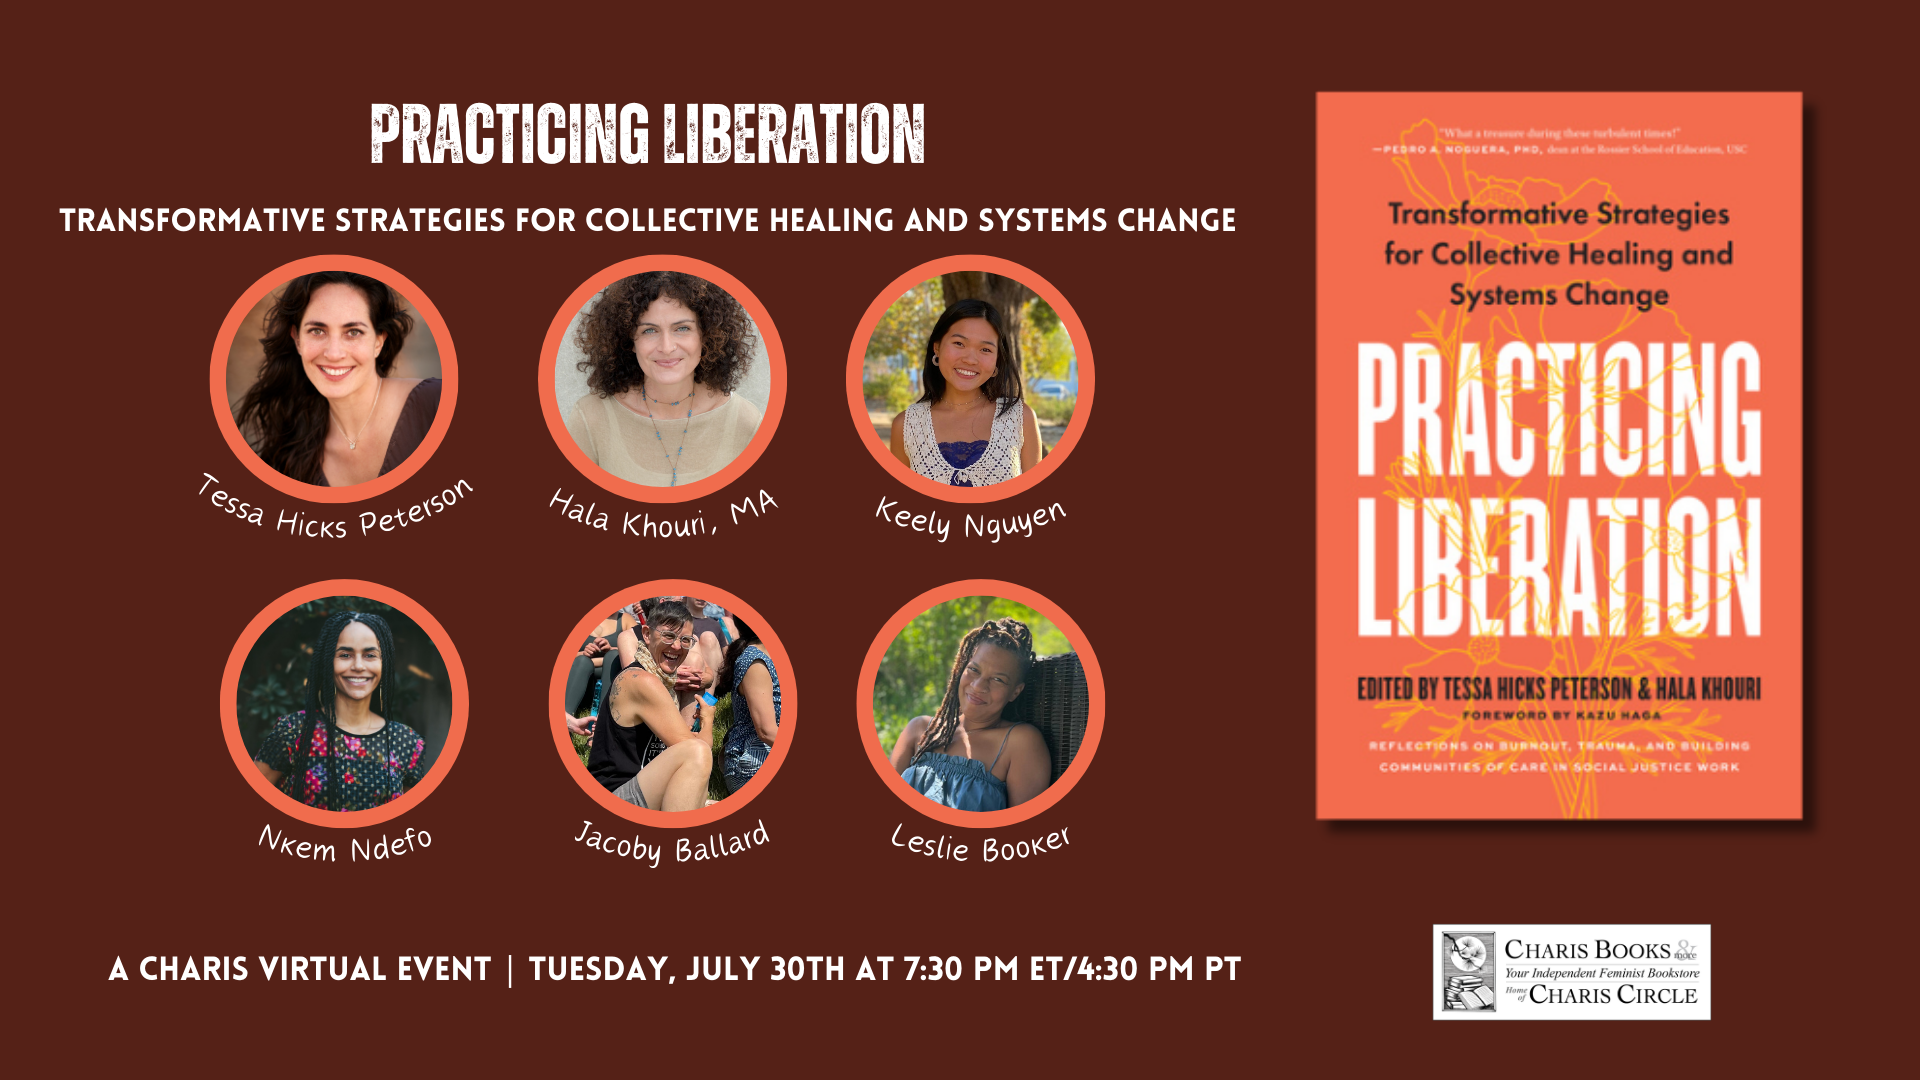 Practicing Liberation: Transformative Strategies for Collective Healing & Systems Change: Reflections on Burnout, Trauma & Building Communities of Care in Social Justice Work event cover photo